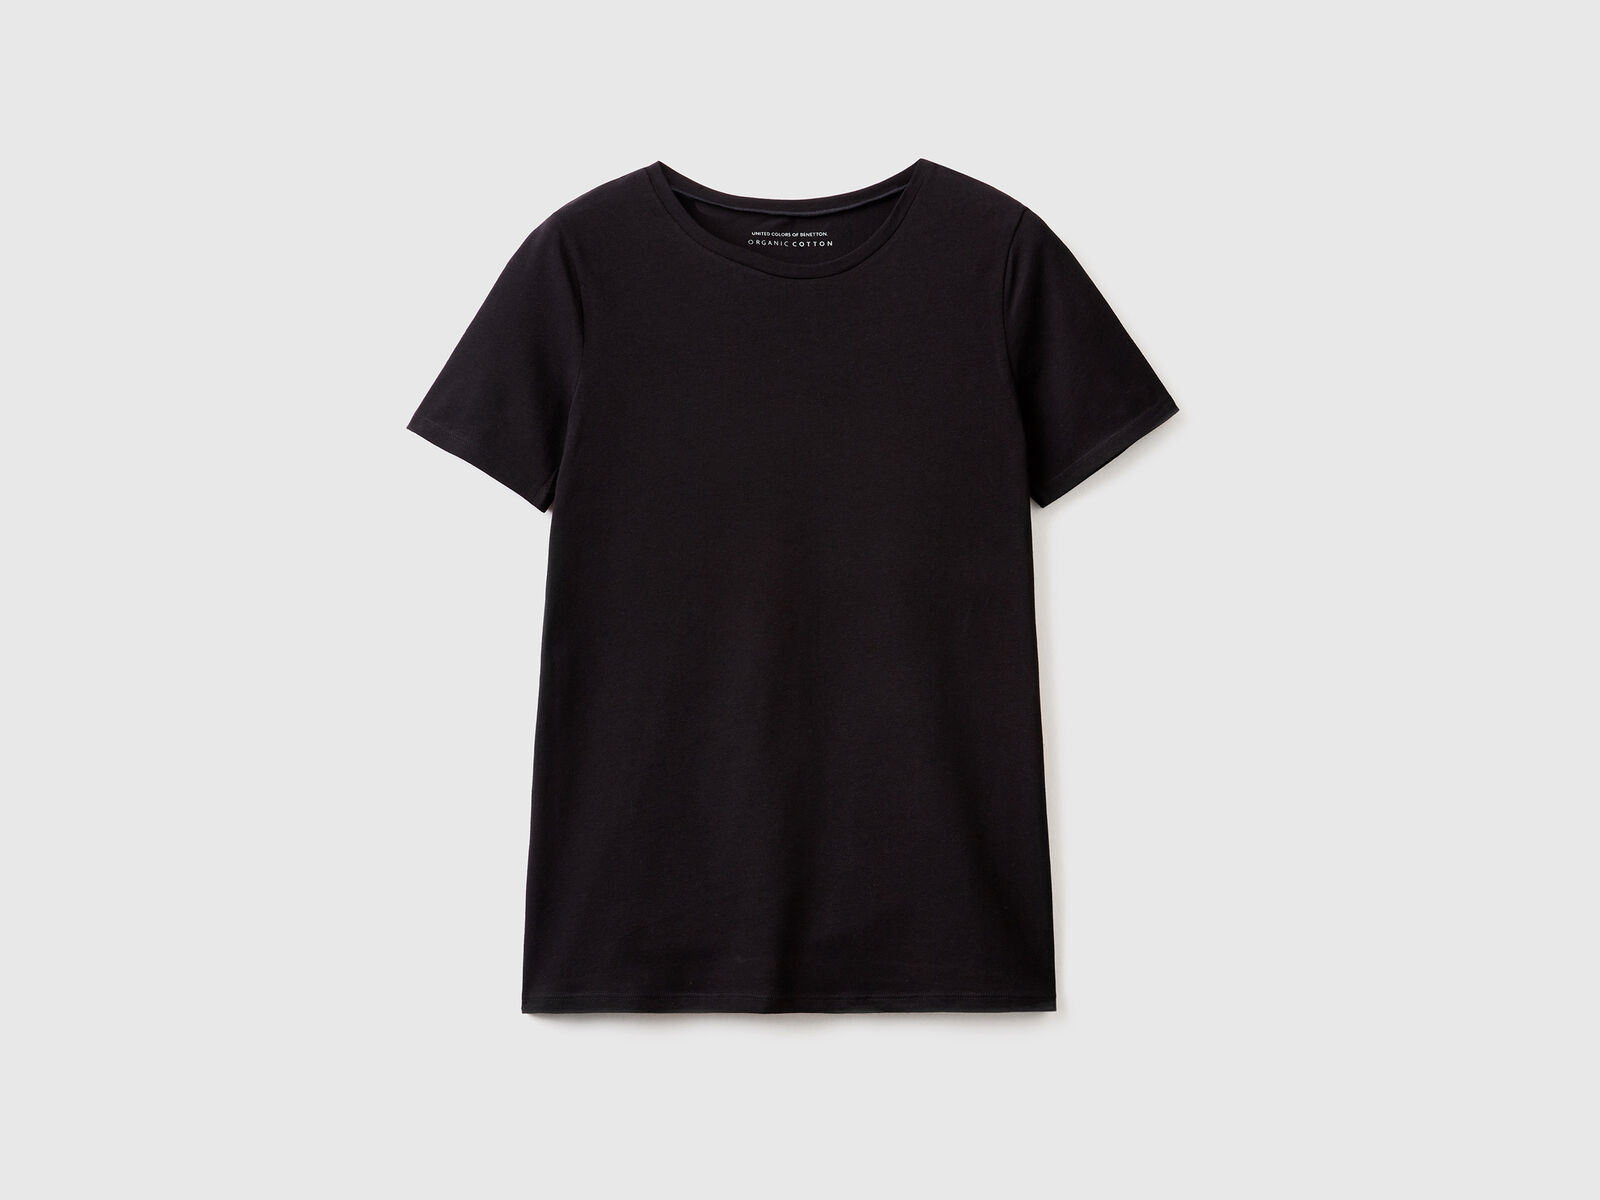 Organic T-shirt weight jersey – Charcoal – Cotton/elastane stretch fabric.  - Bobbins & Buttons Fabric Shop Leicester, Sewing Patterns, Sewing  Classes